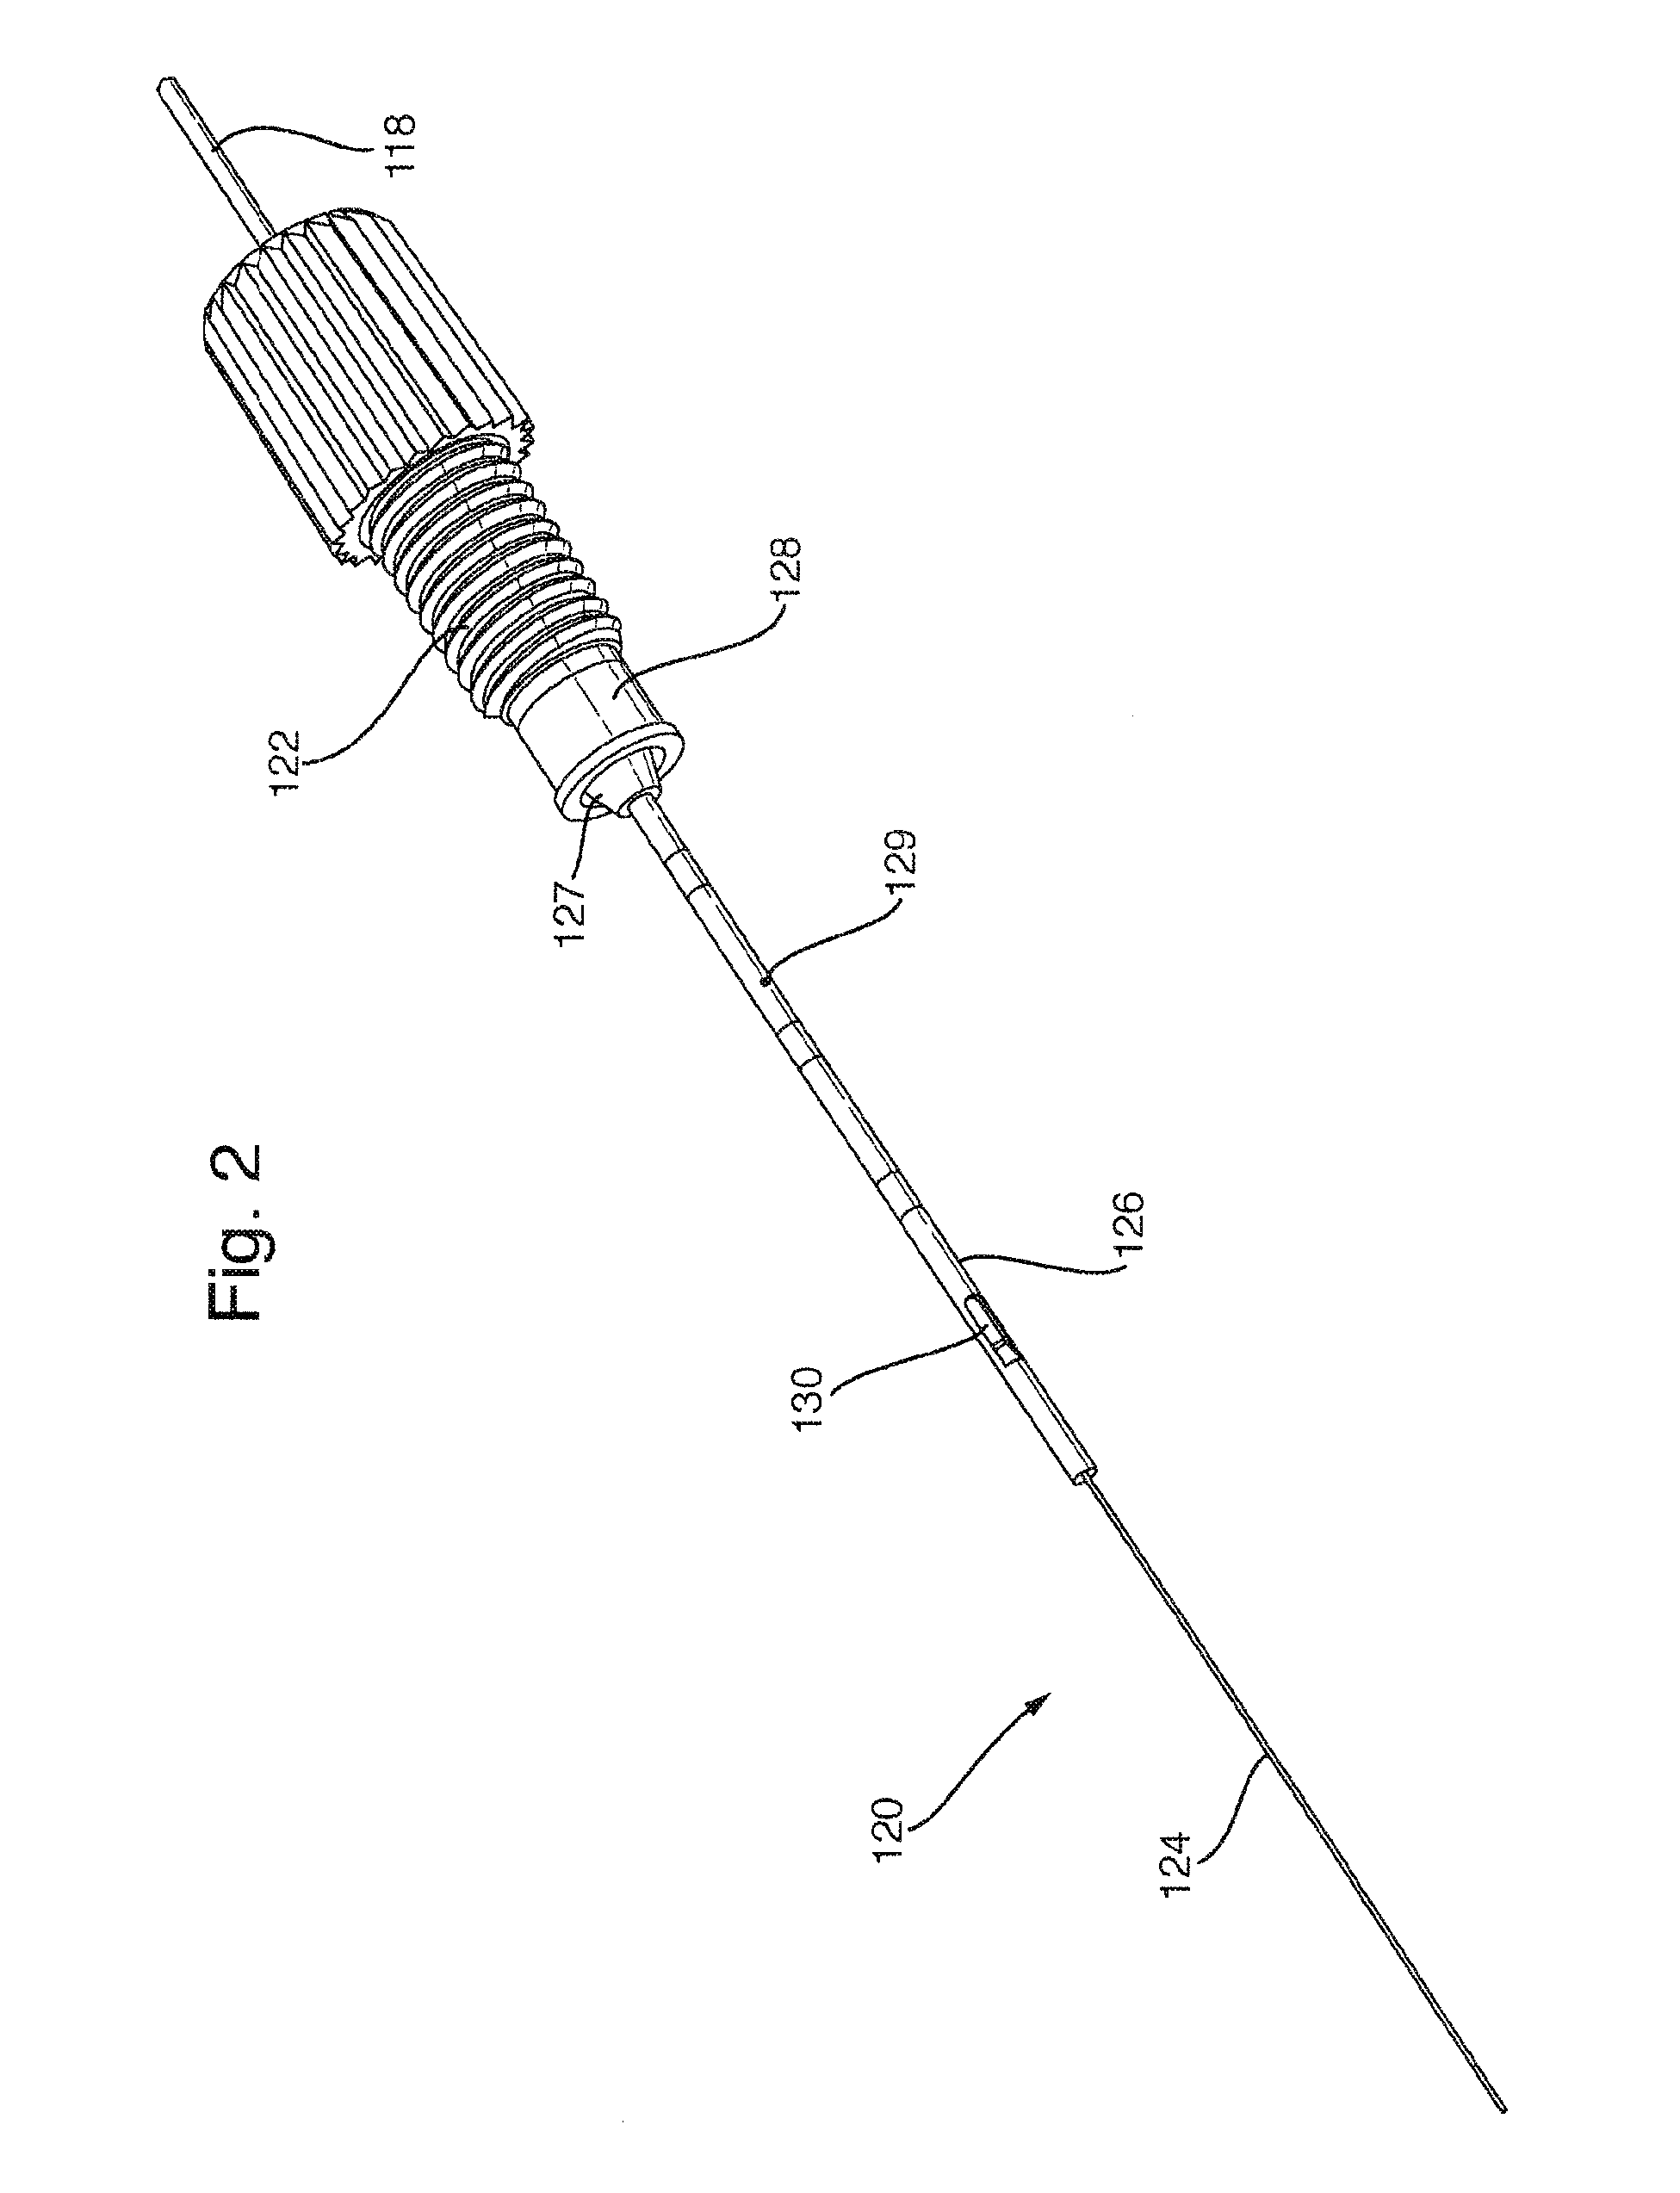 Probe Assembly for Attaching a Chromatography Device to a Mass Spectrometer